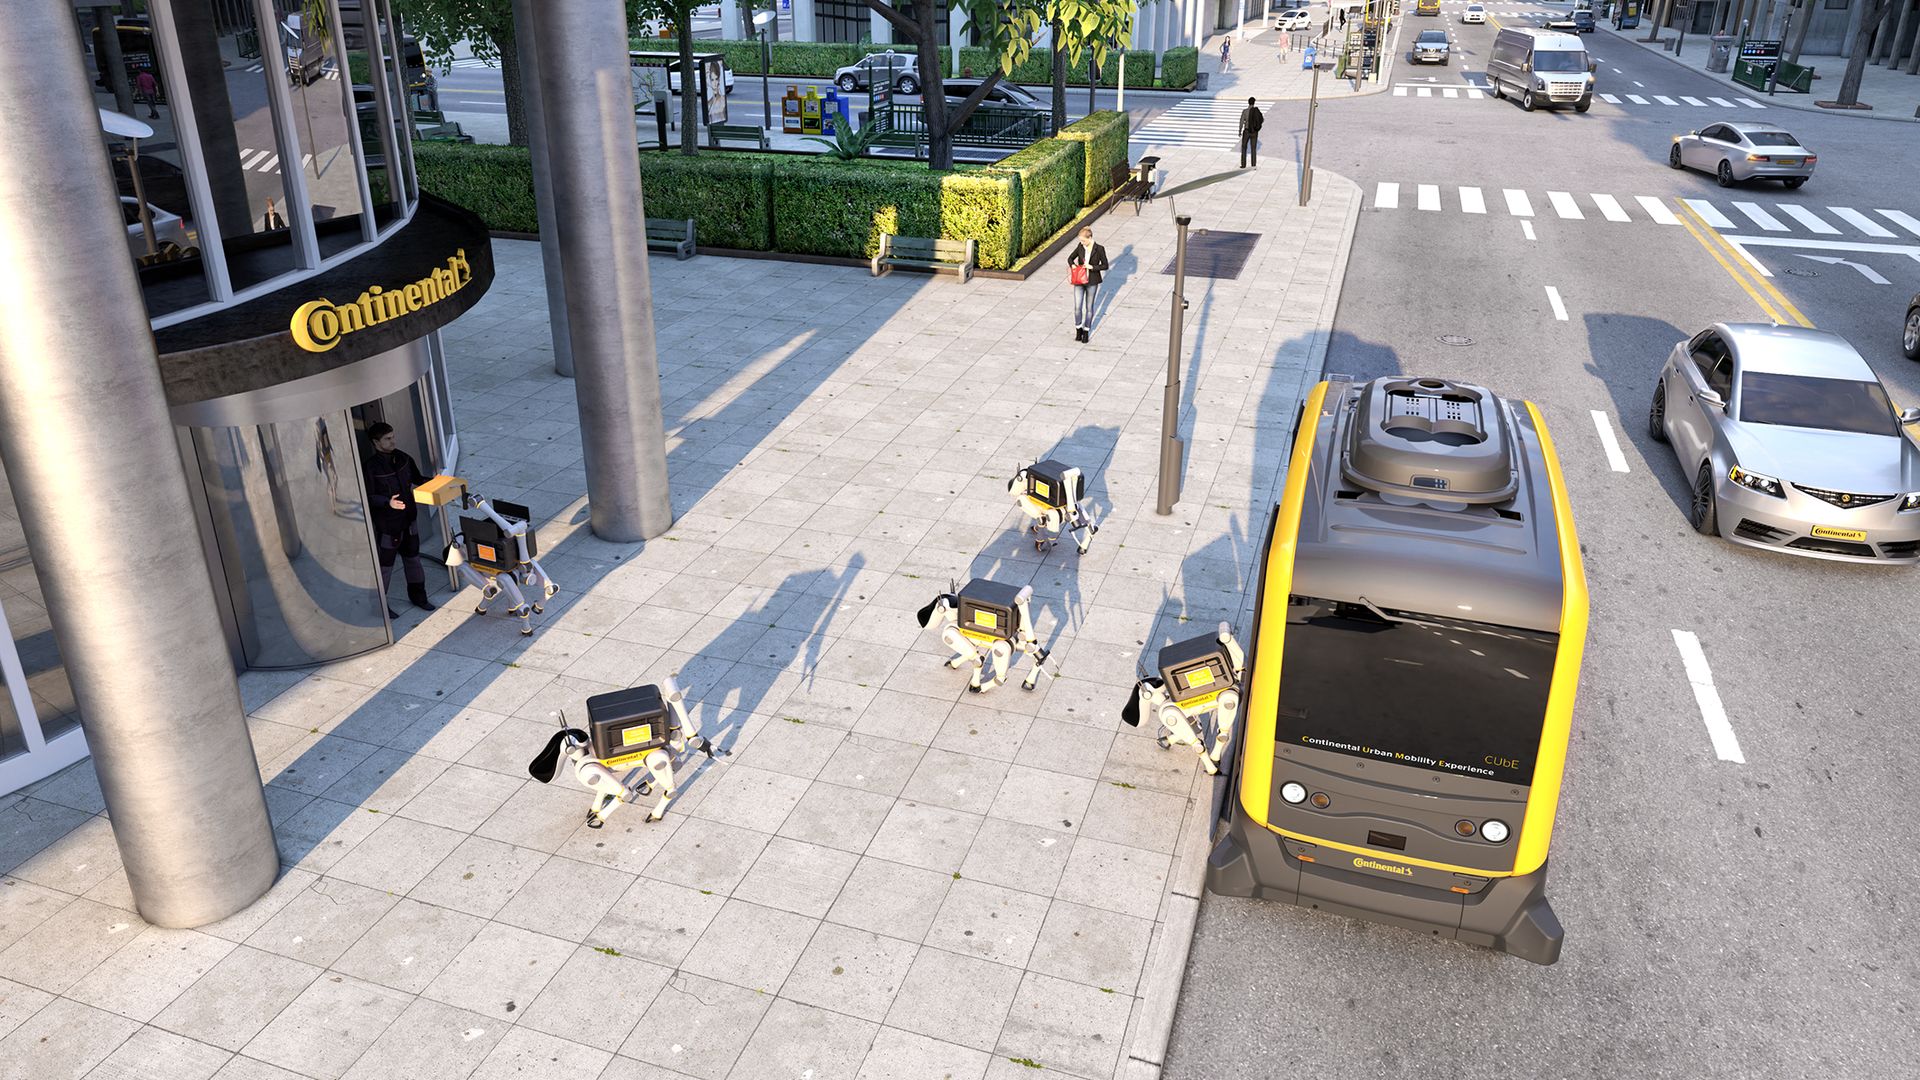 Image of autonomous vehicle offloading robots to deliver packages in urban area.